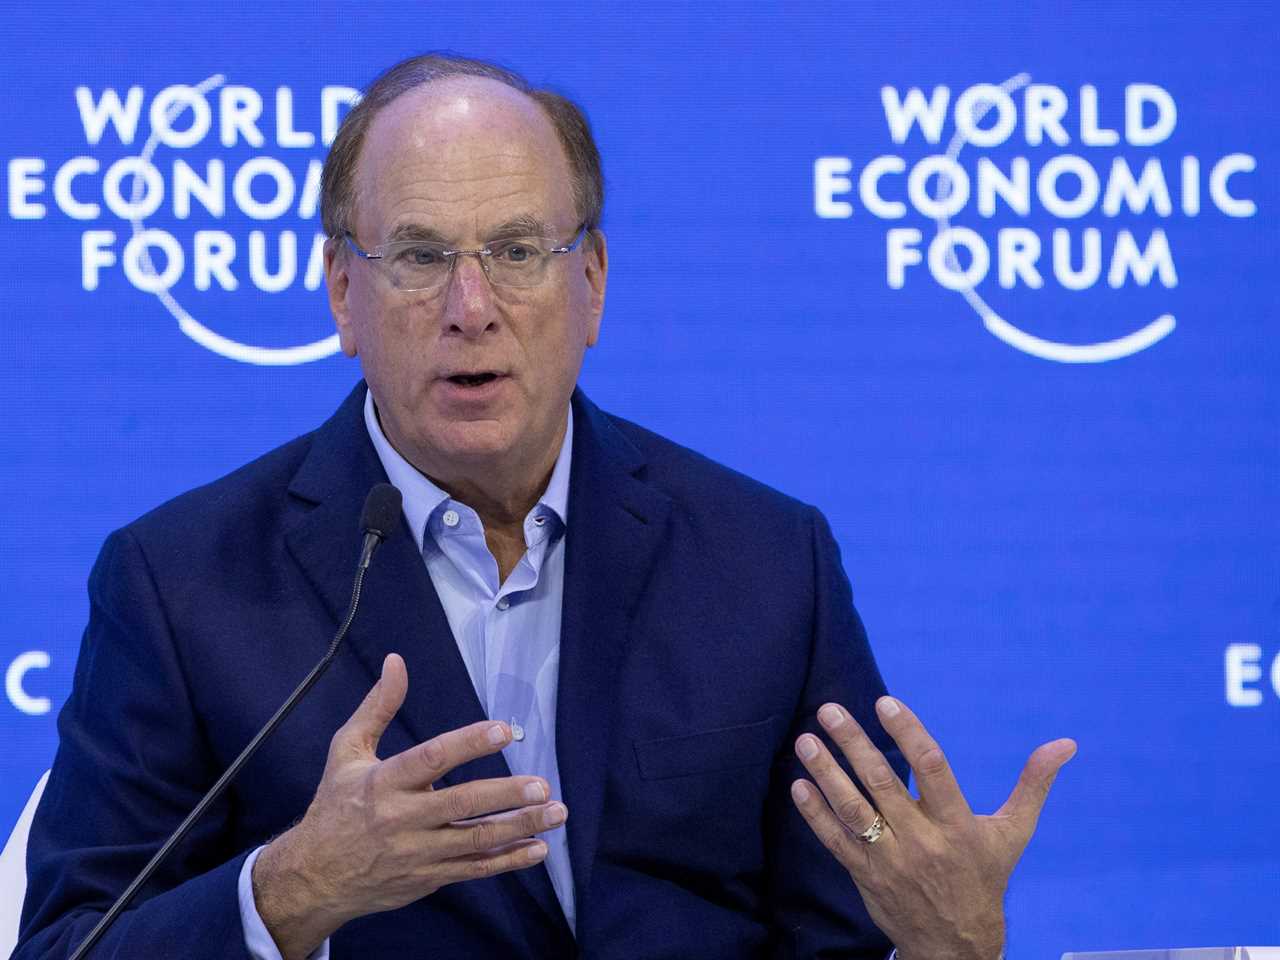 BlackRock CEO Larry Fink gestures during a panel discussion in January 2023. He is in front of a blue background.